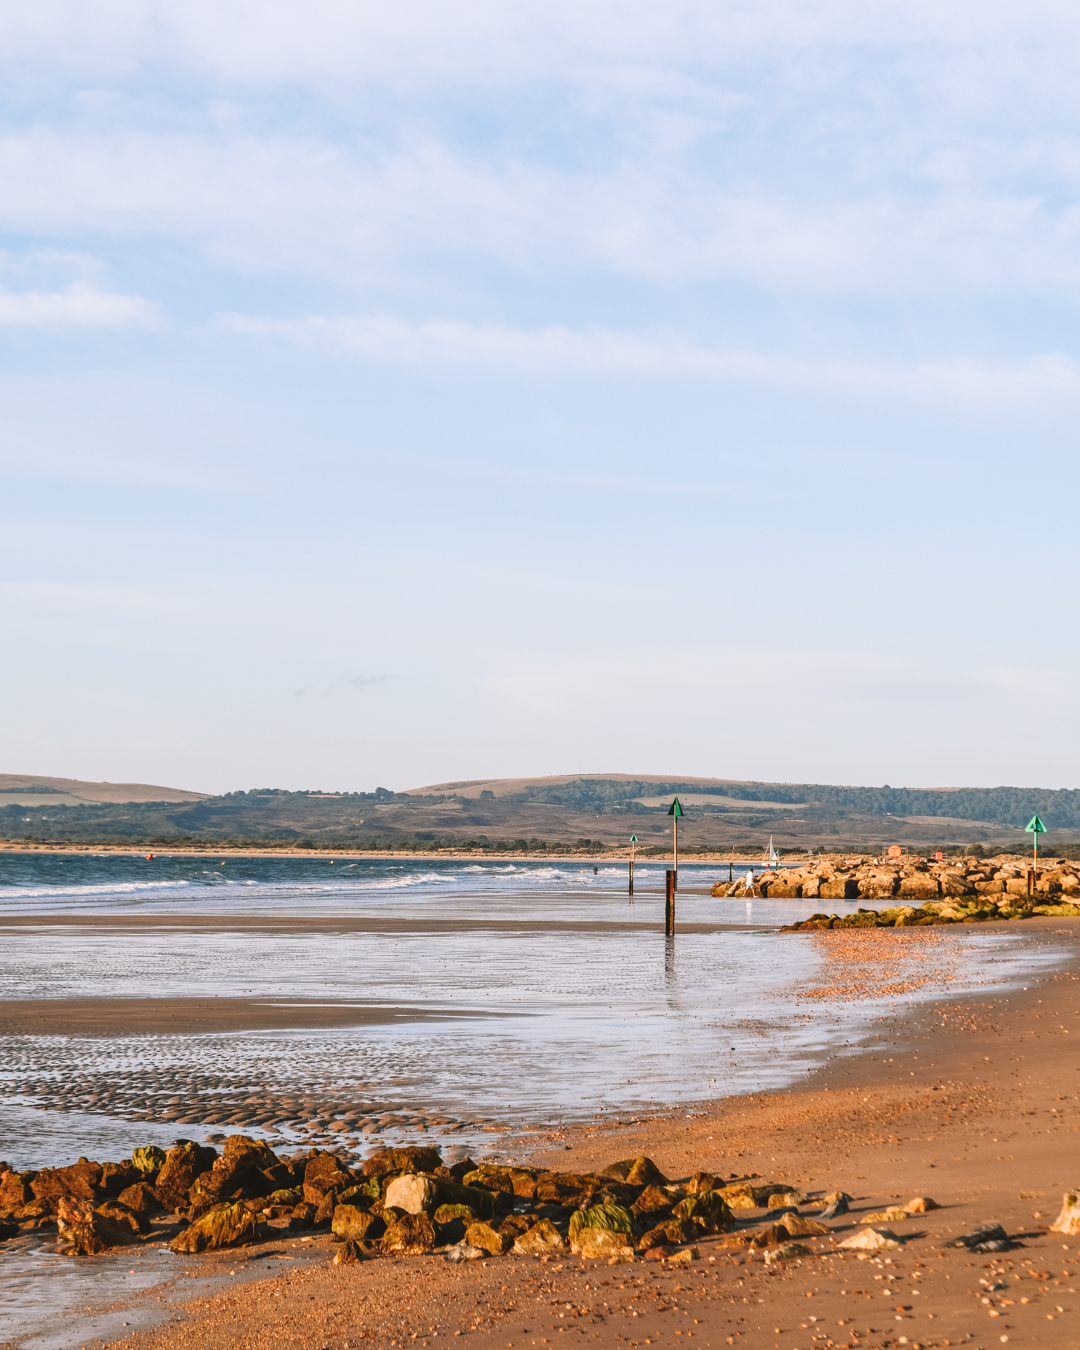 Places to visit in Dorset - Sandbanks, Poole - seaside towns in dorset